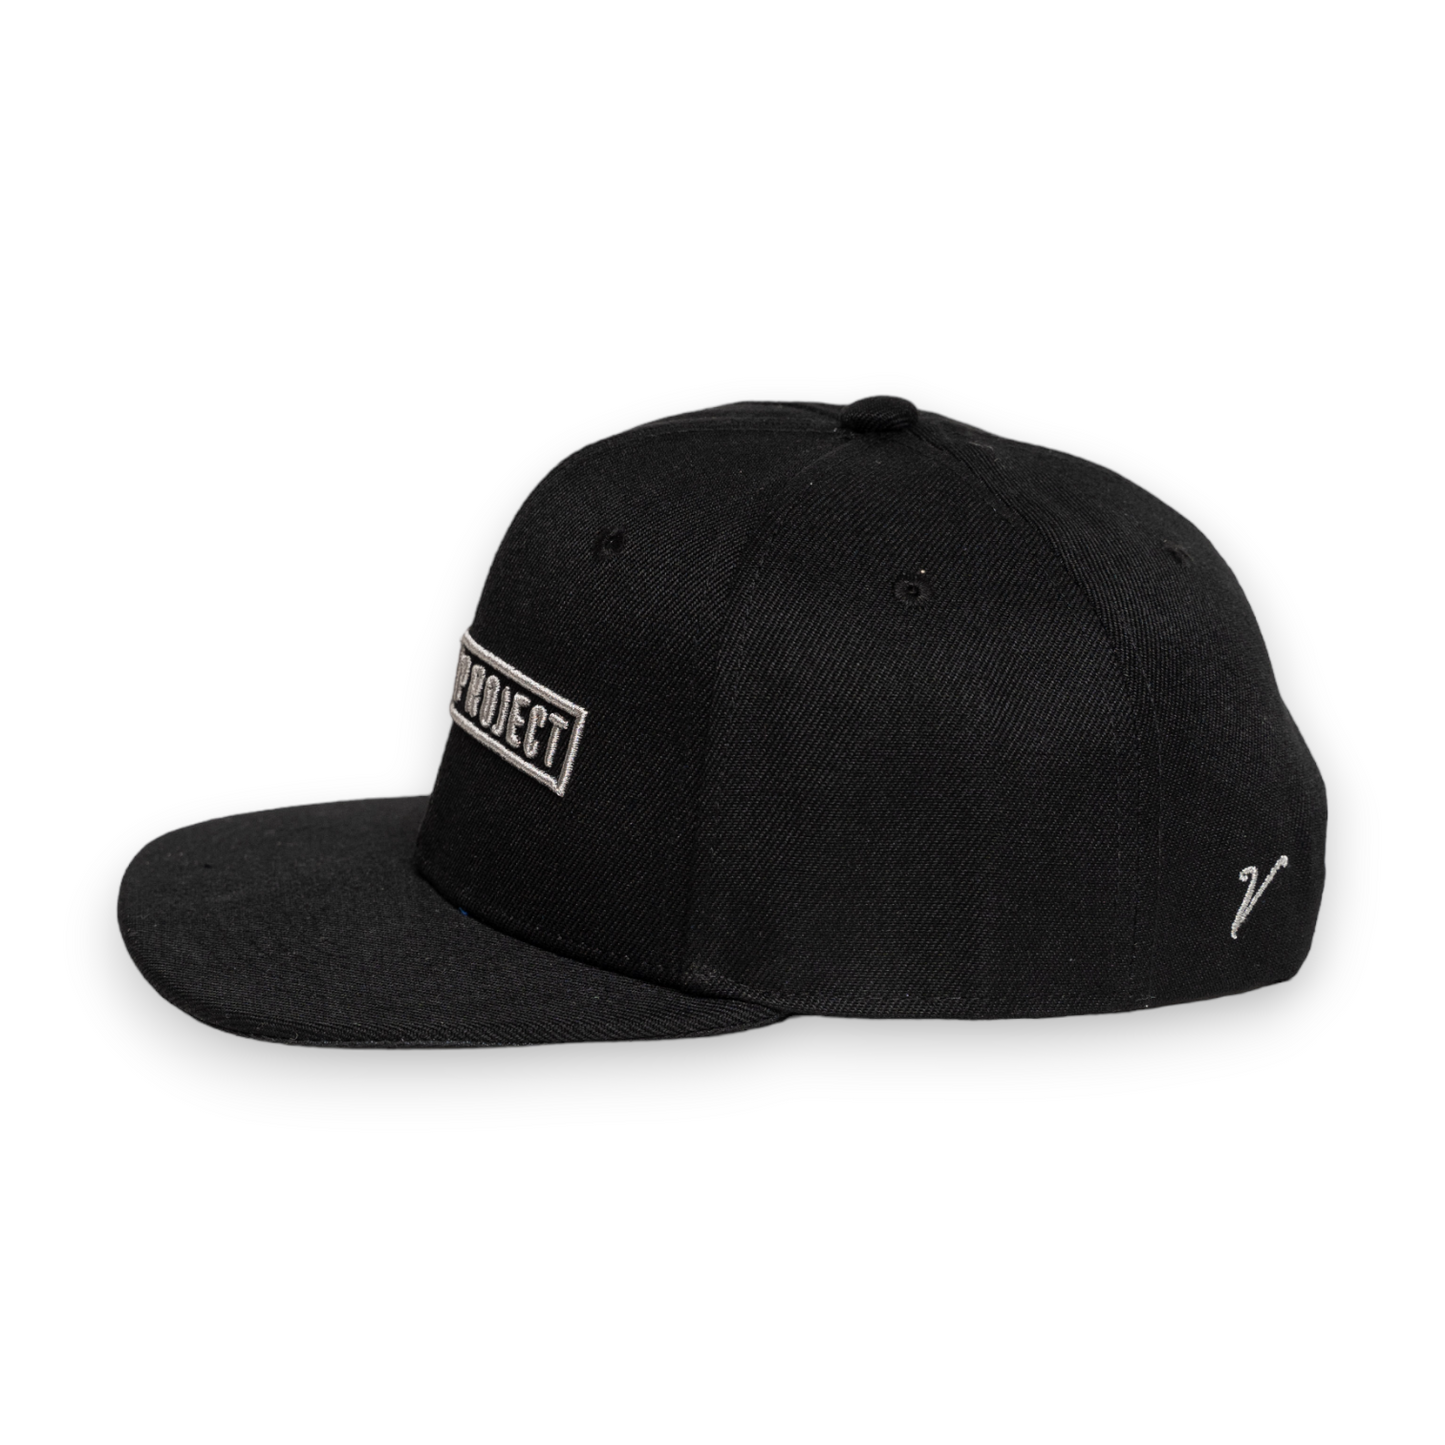 Pilot Project Flat Brim with Silver Logo